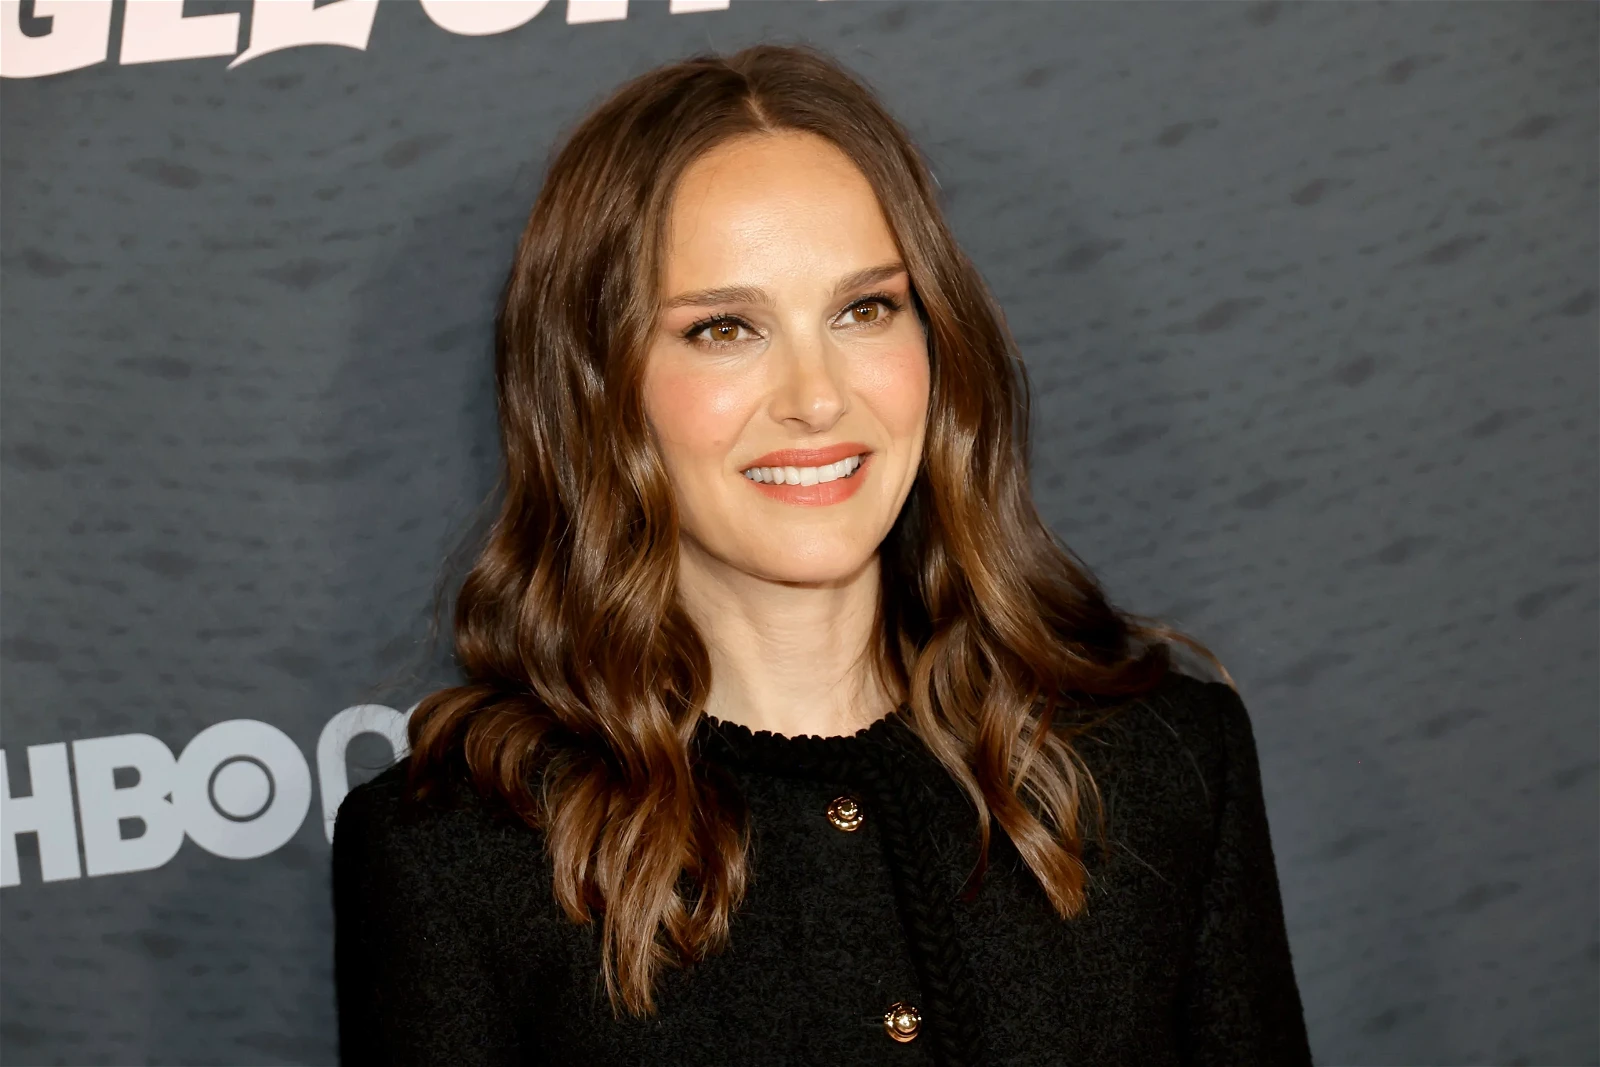 Natalie Portman reveals she was paid less than her co-star